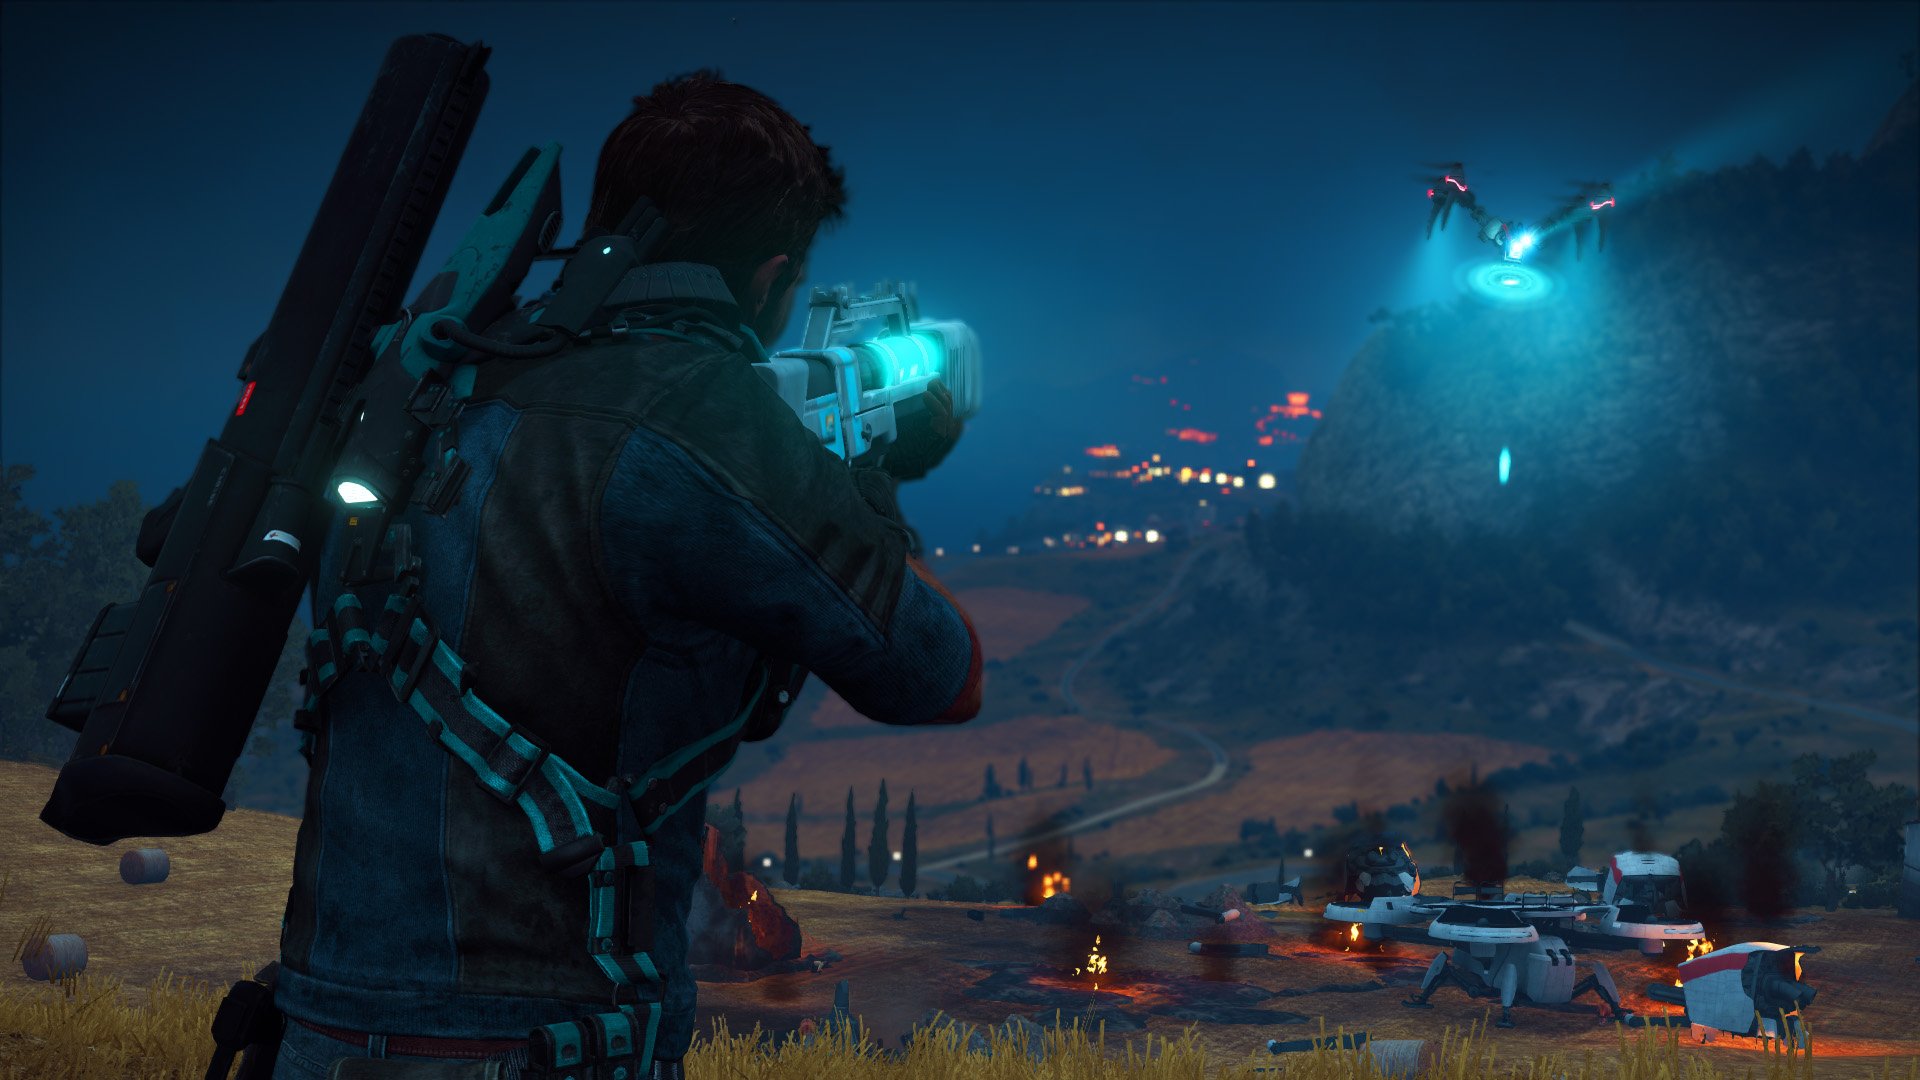 Just Cause 3 Sky Fortress Pack 2